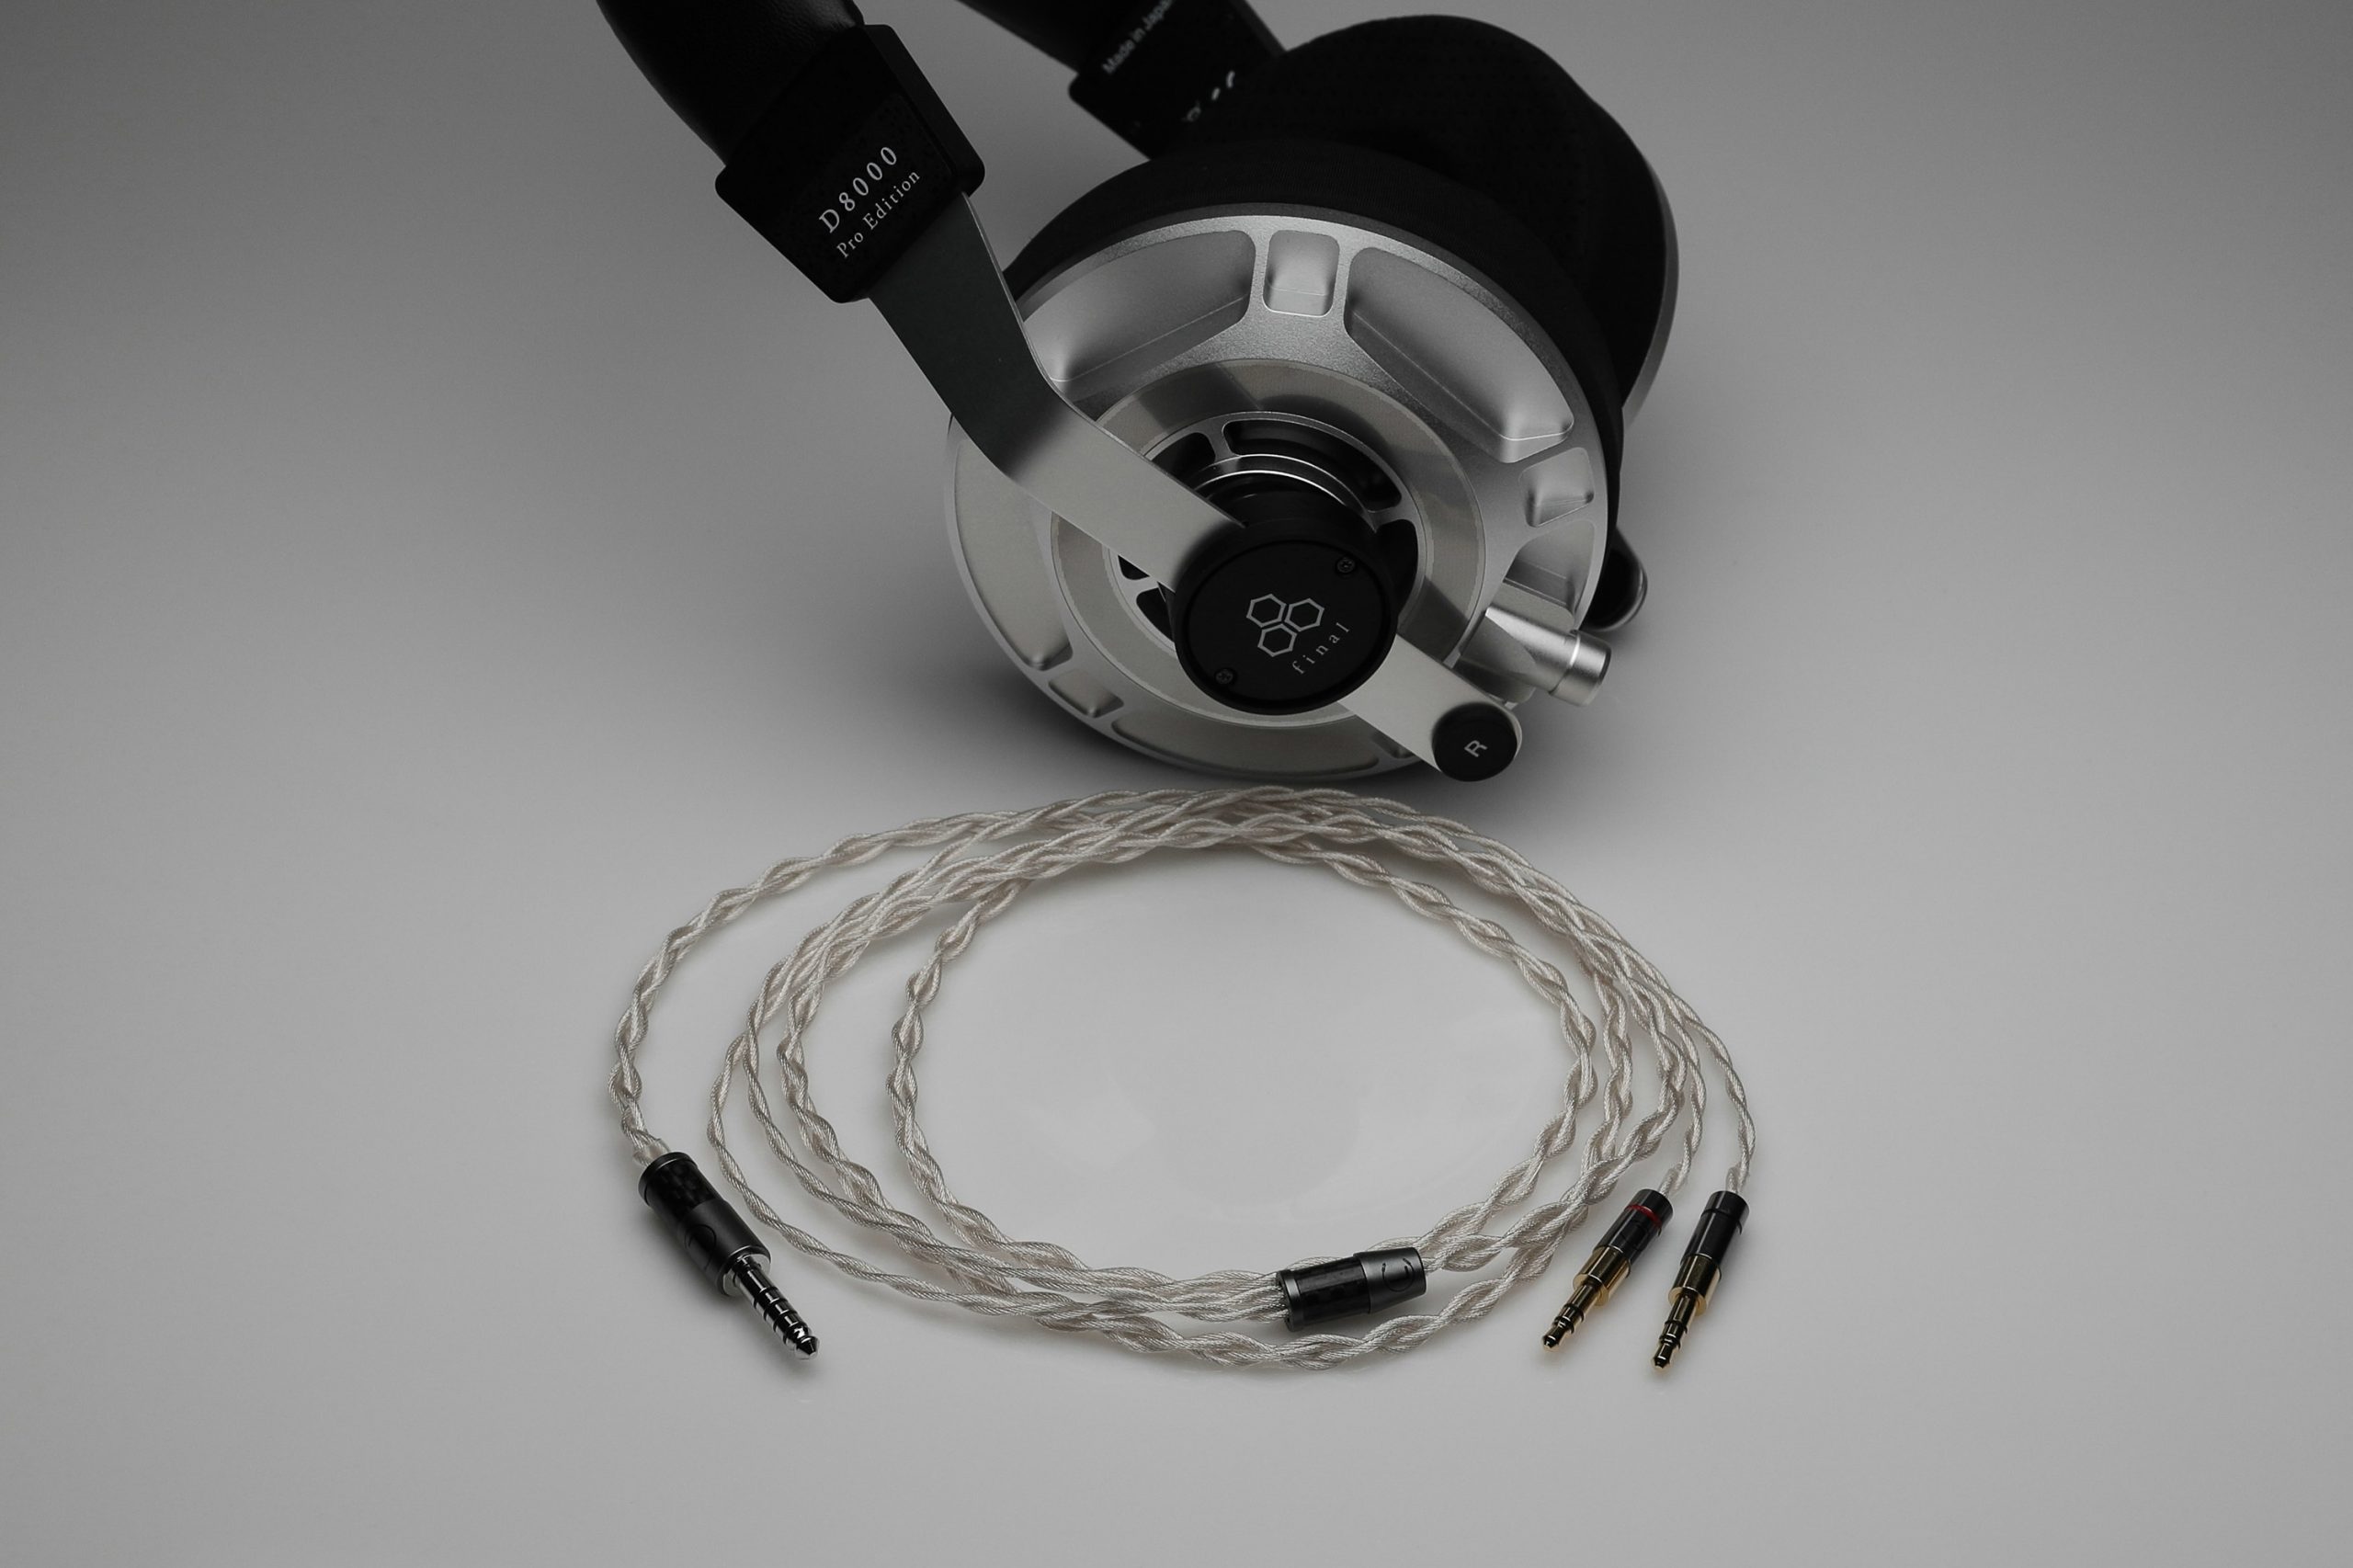 Ultimate pure Silver Final Sonorous X VIII D7000 D8000 Pandora Hope multistrand litz awg24 headphone upgrade cable by Lavricables